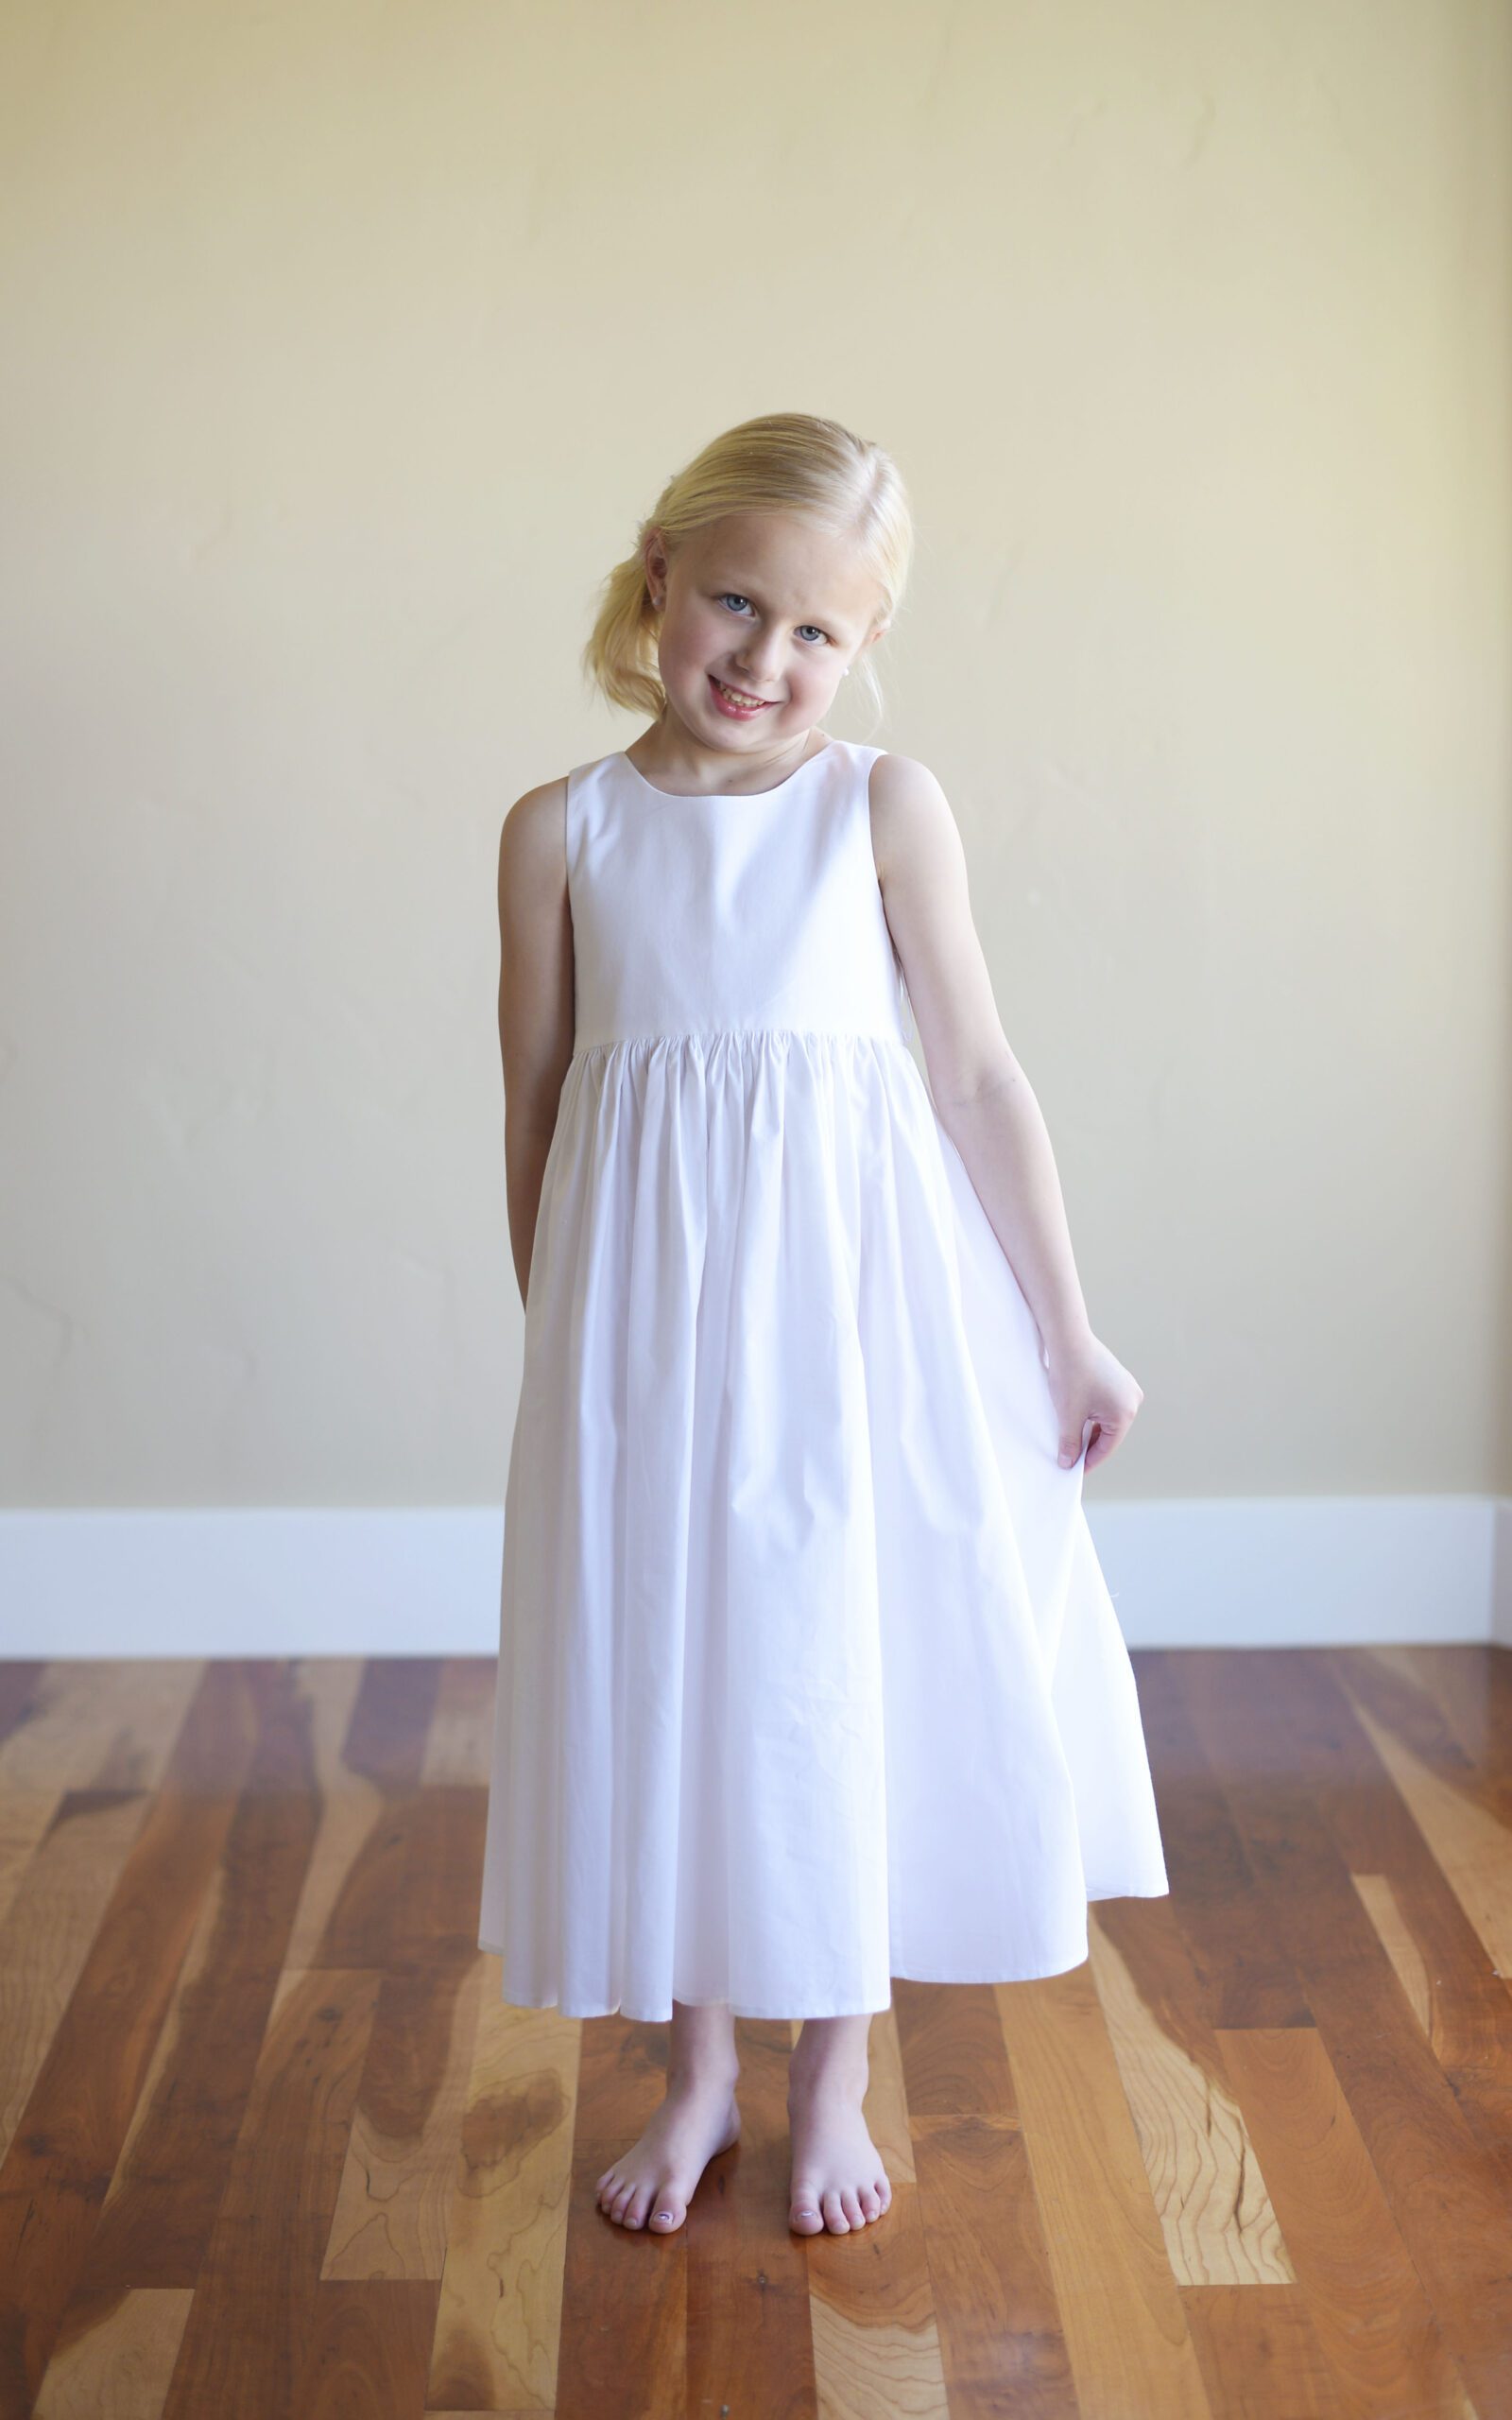 A photo of a young flower girl wearing a cotton dress